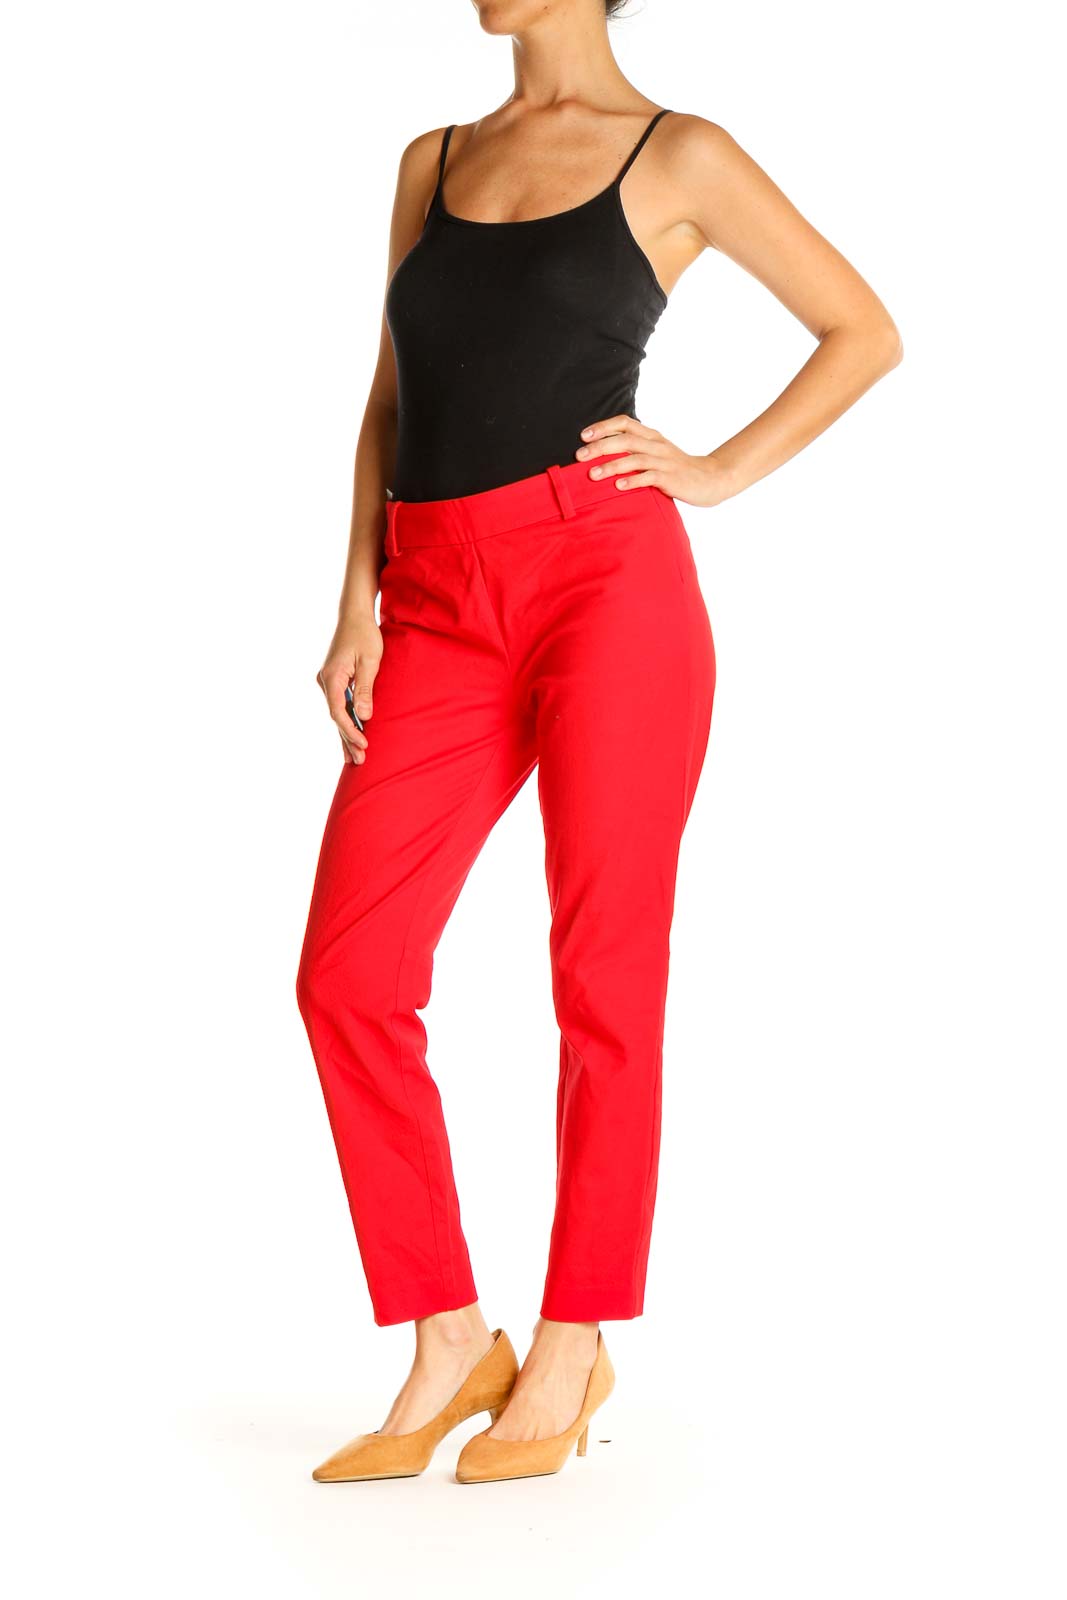 Buy Red Trousers & Pants for Women by DeMoza Online | Ajio.com